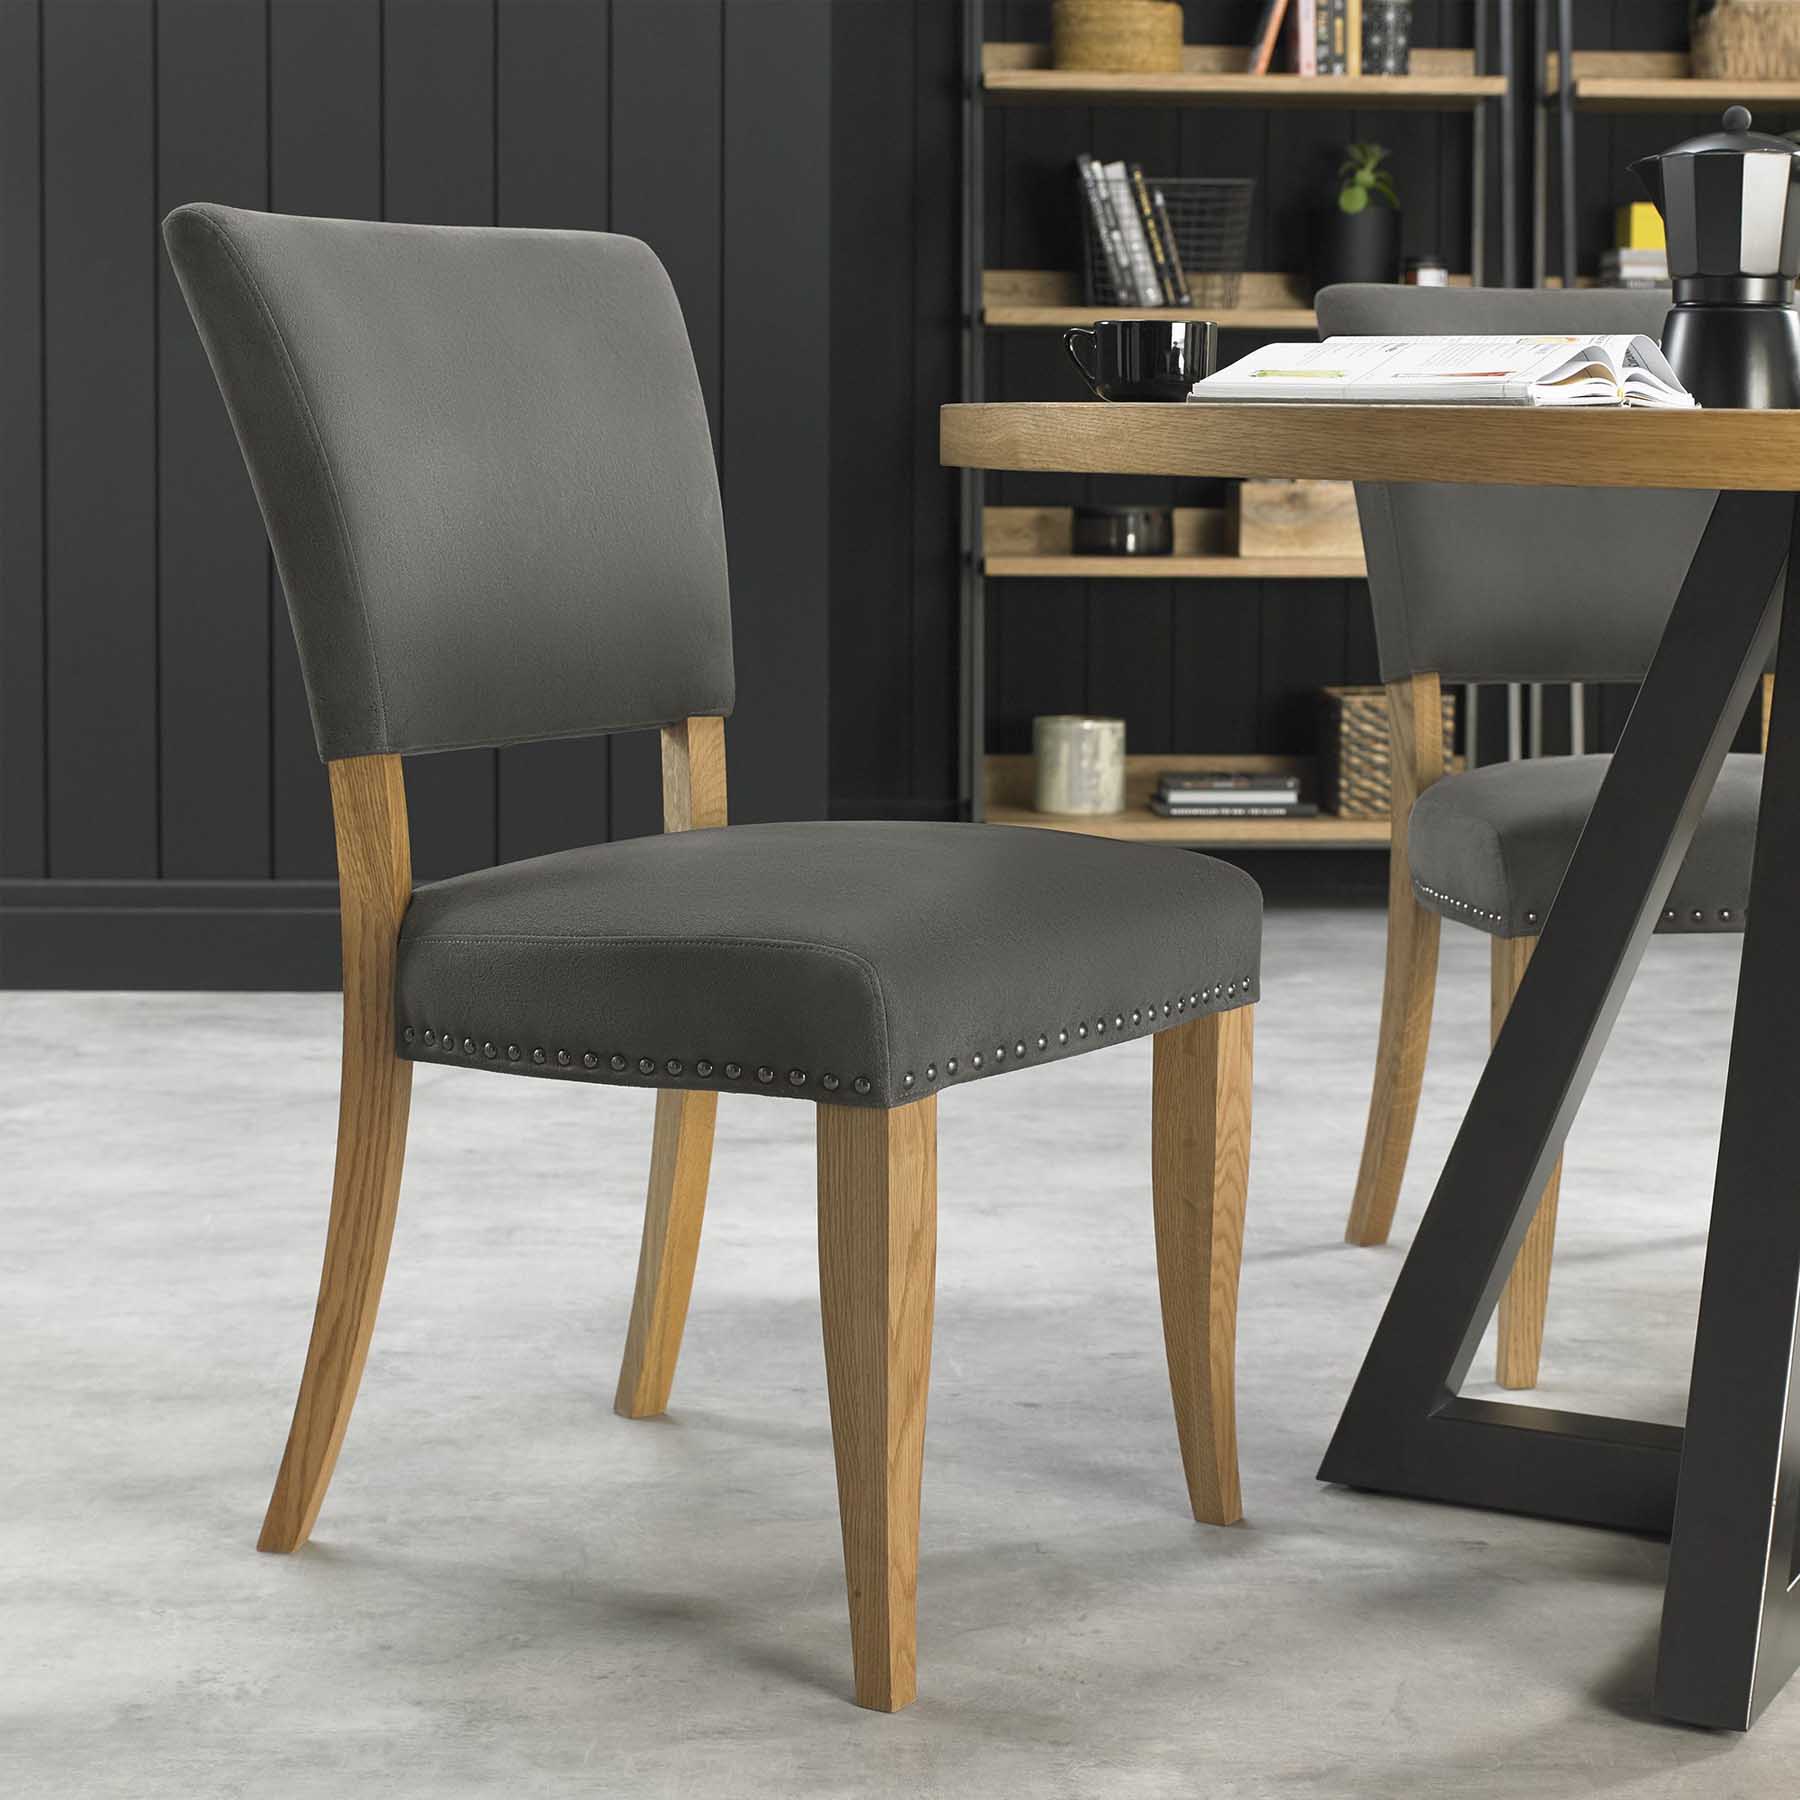 Ravi Rustic Oak Upholstered Dining, Rustic Upholstered Dining Room Chairs